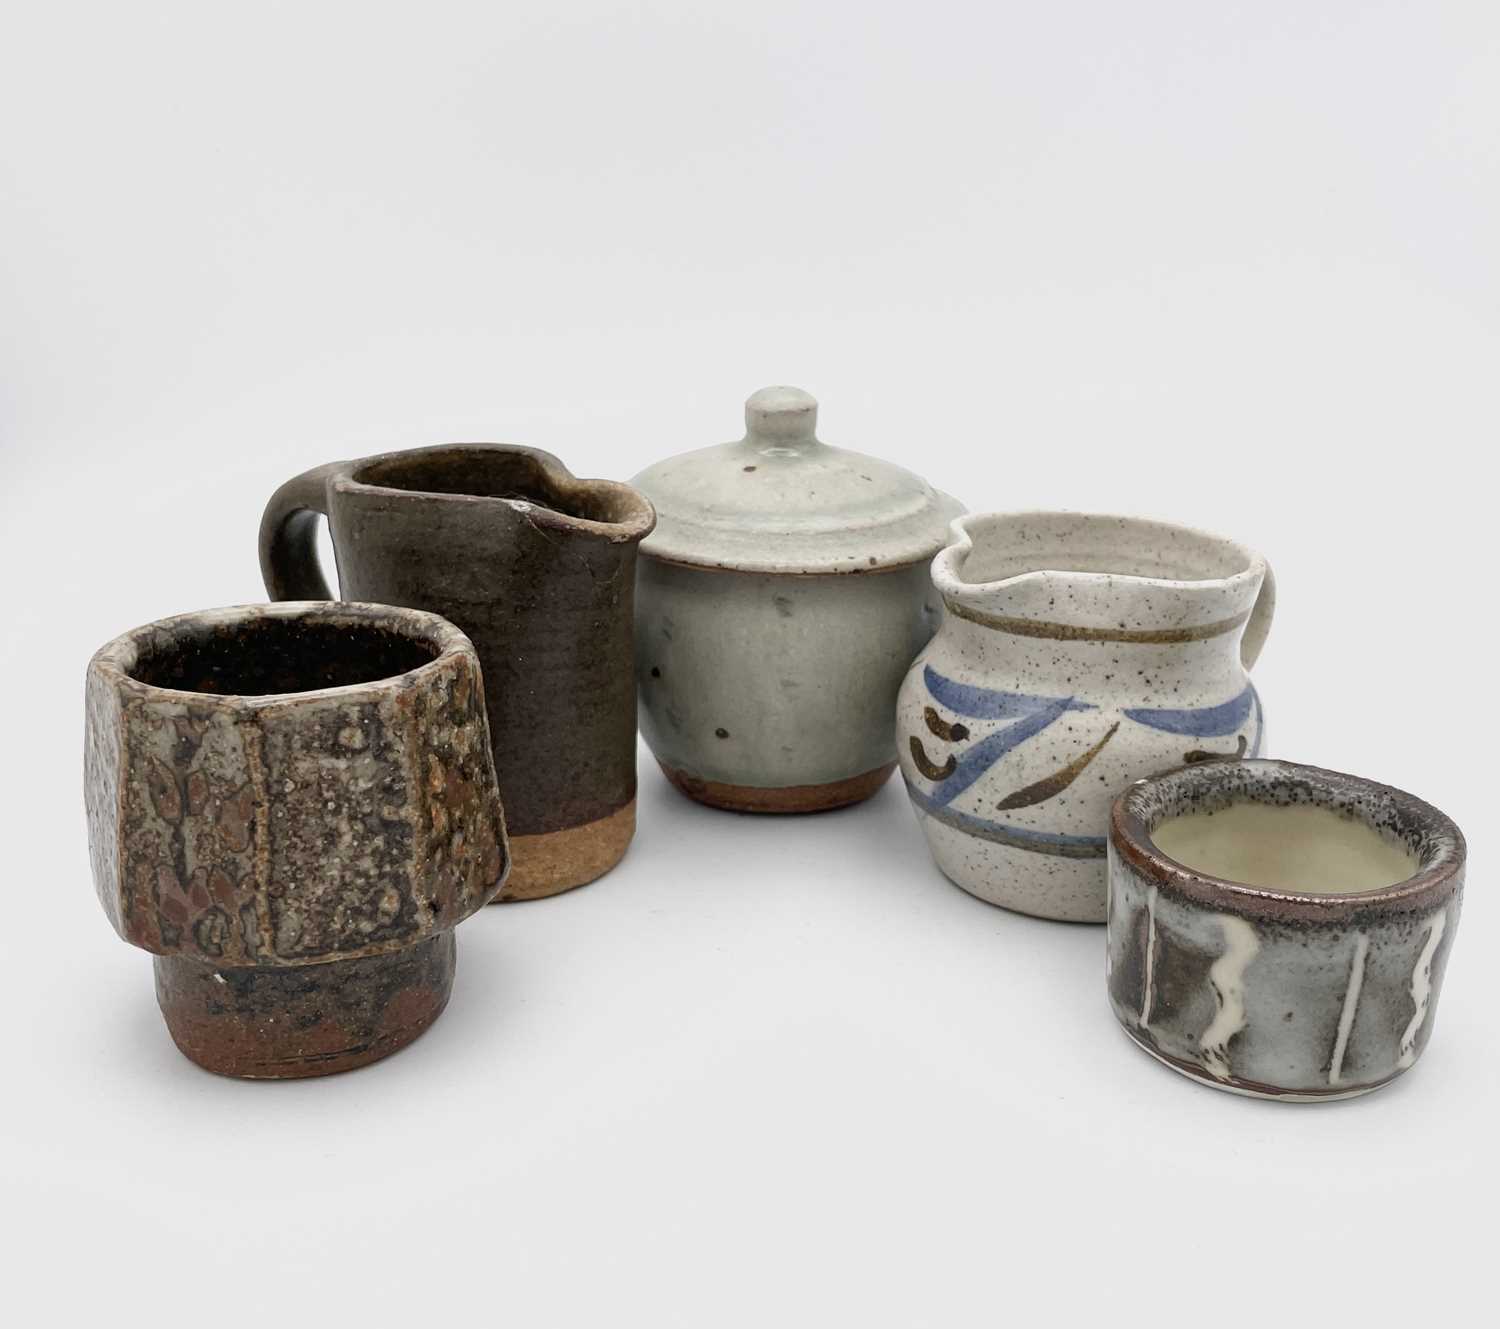 A Bill Marshall (1923-2007) salt, a Richard Batterham small bowl and cover and three other small